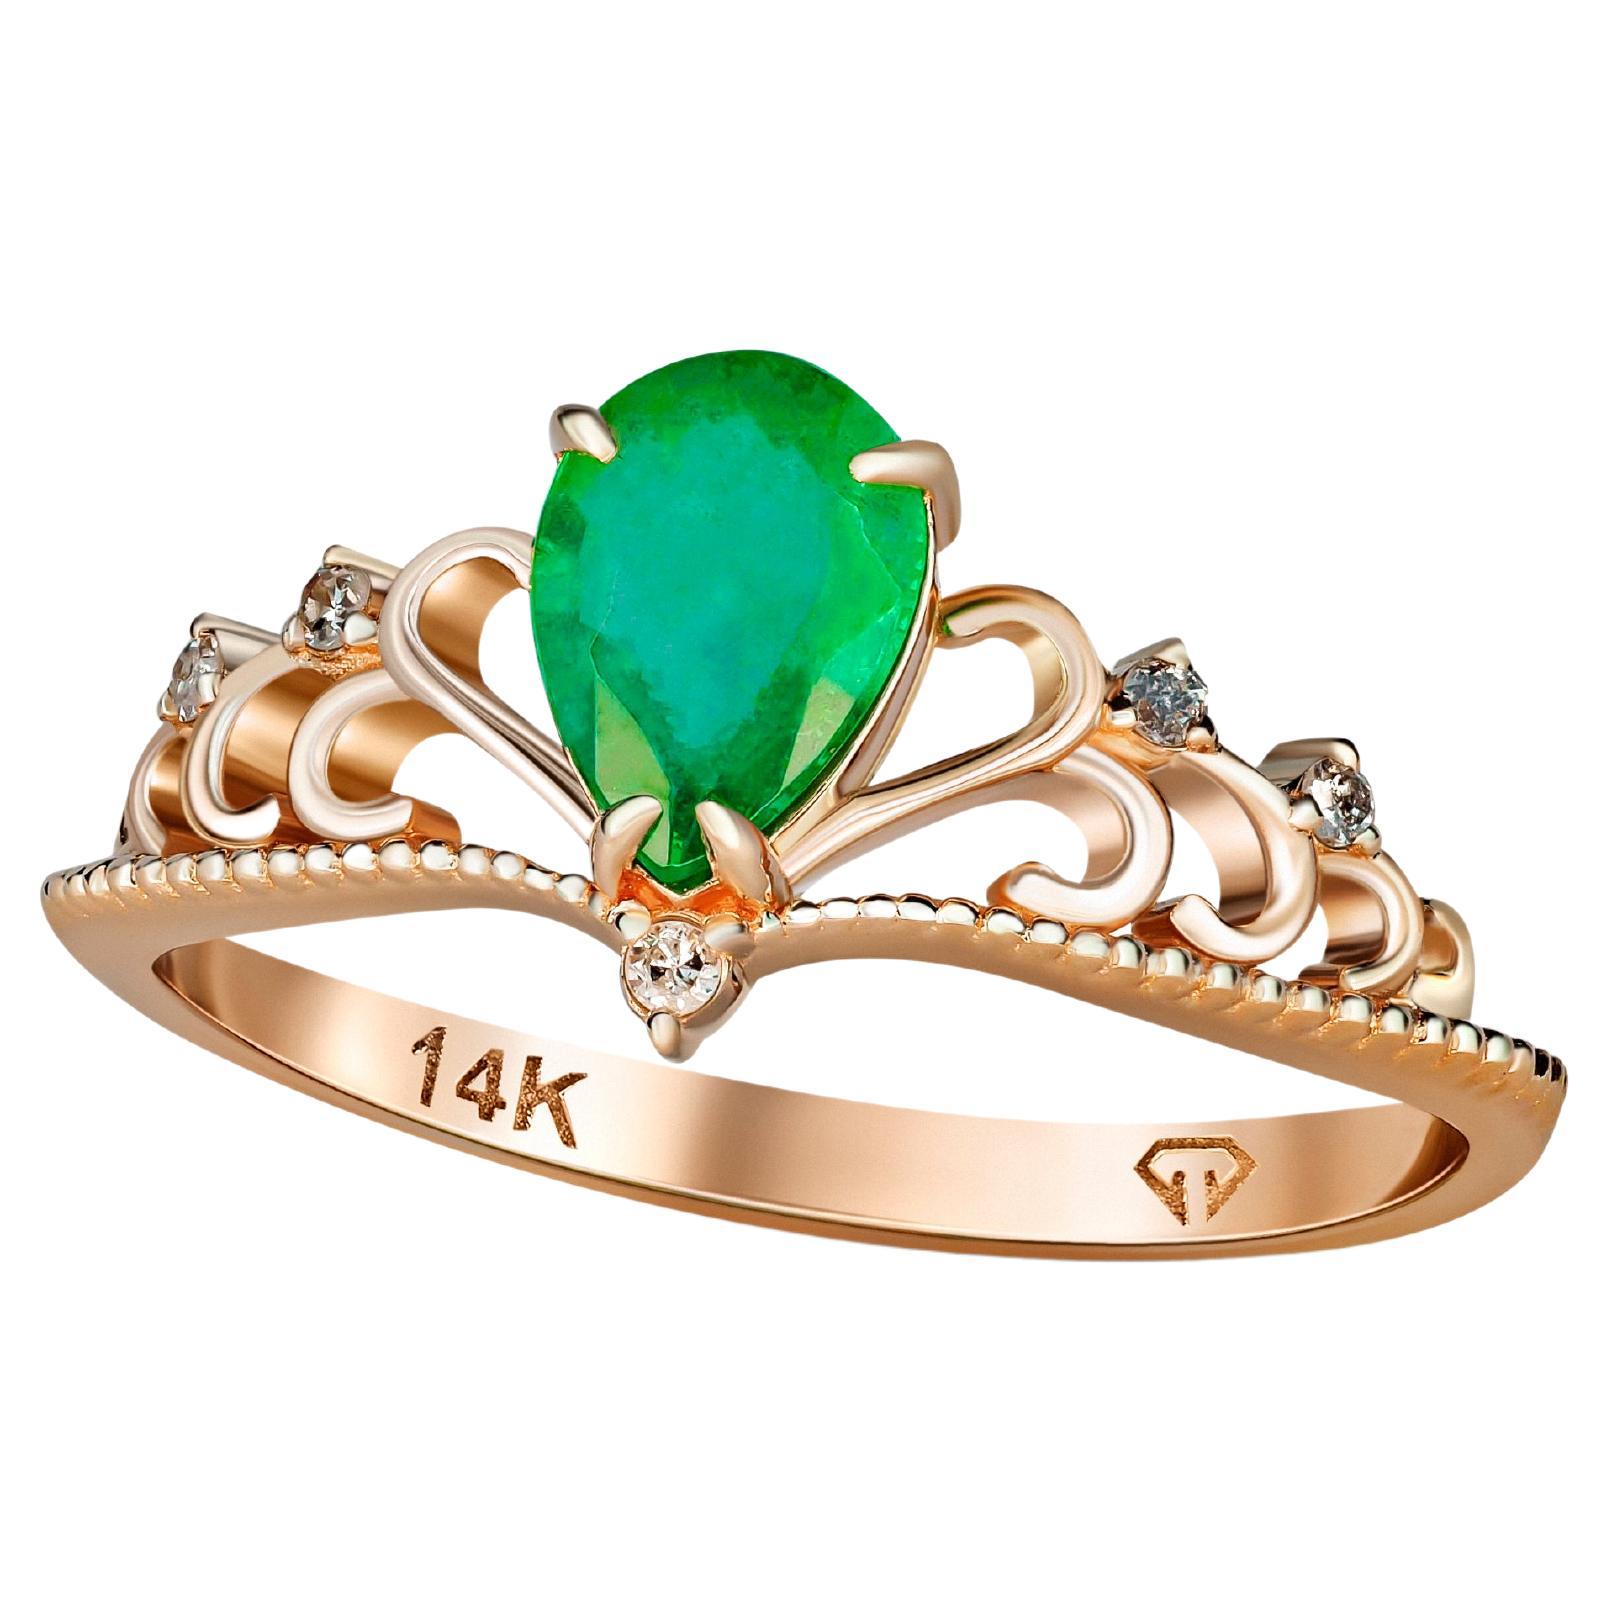 For Sale:  14k Gold Tiara Ring with Natural Emerald and Diamonds!